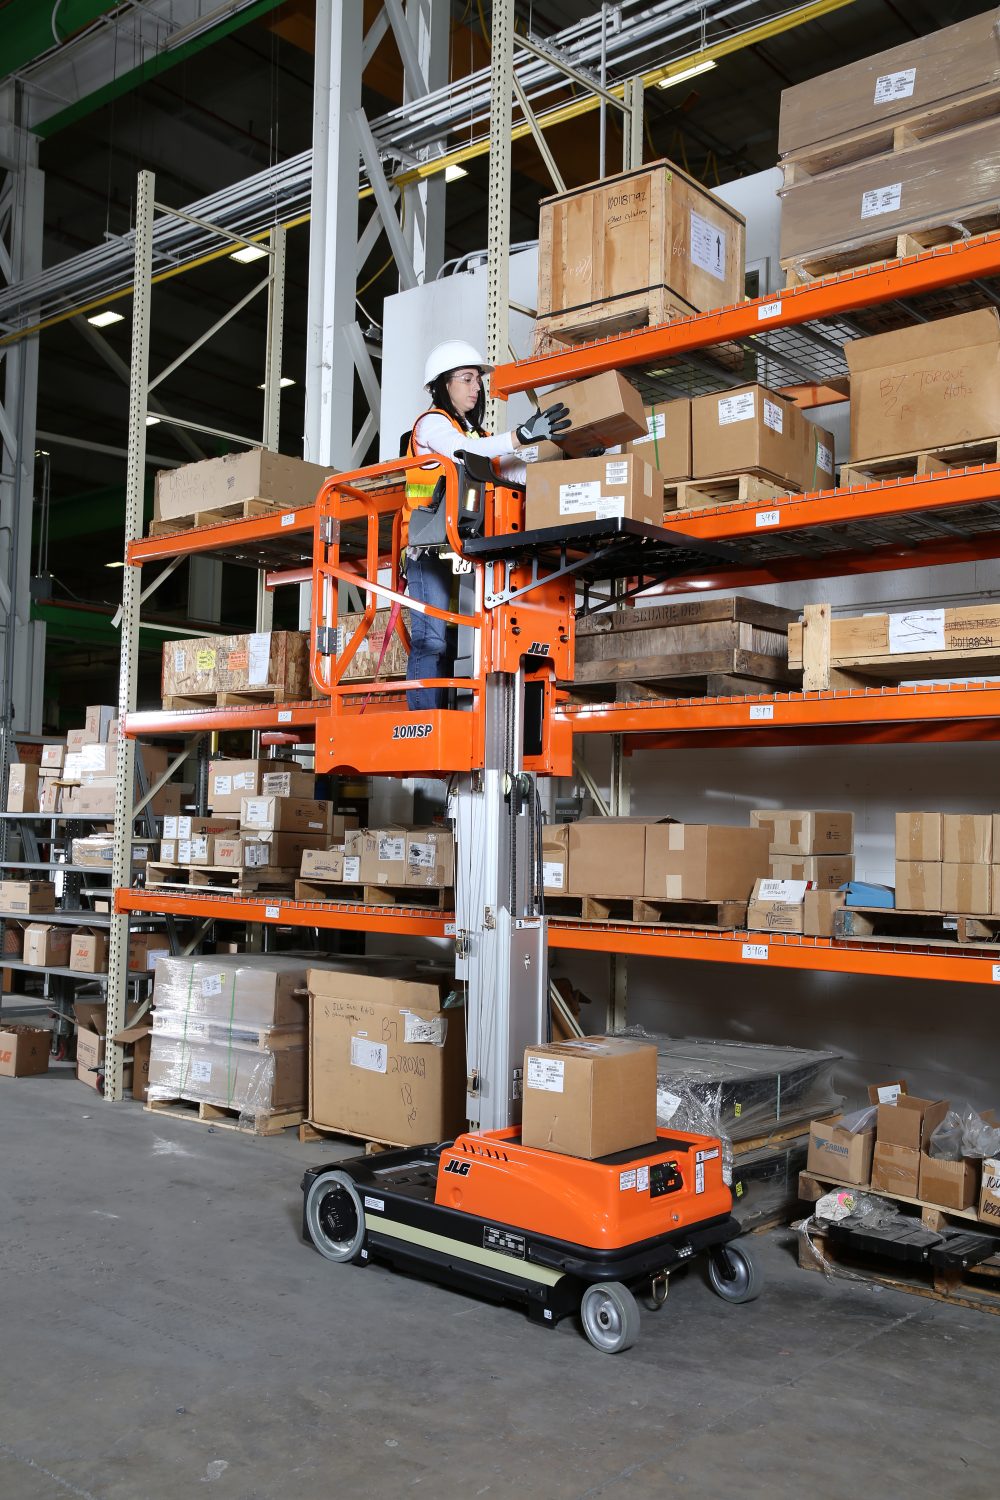 JLG Industries a global manufacturer of aerial equipment will showcase select low-level access solutions, vertical lifts and compact crawler booms at the National Facilities Management & Technology Expo March 20 – 22 in Baltimore, MD, at booth #1909.